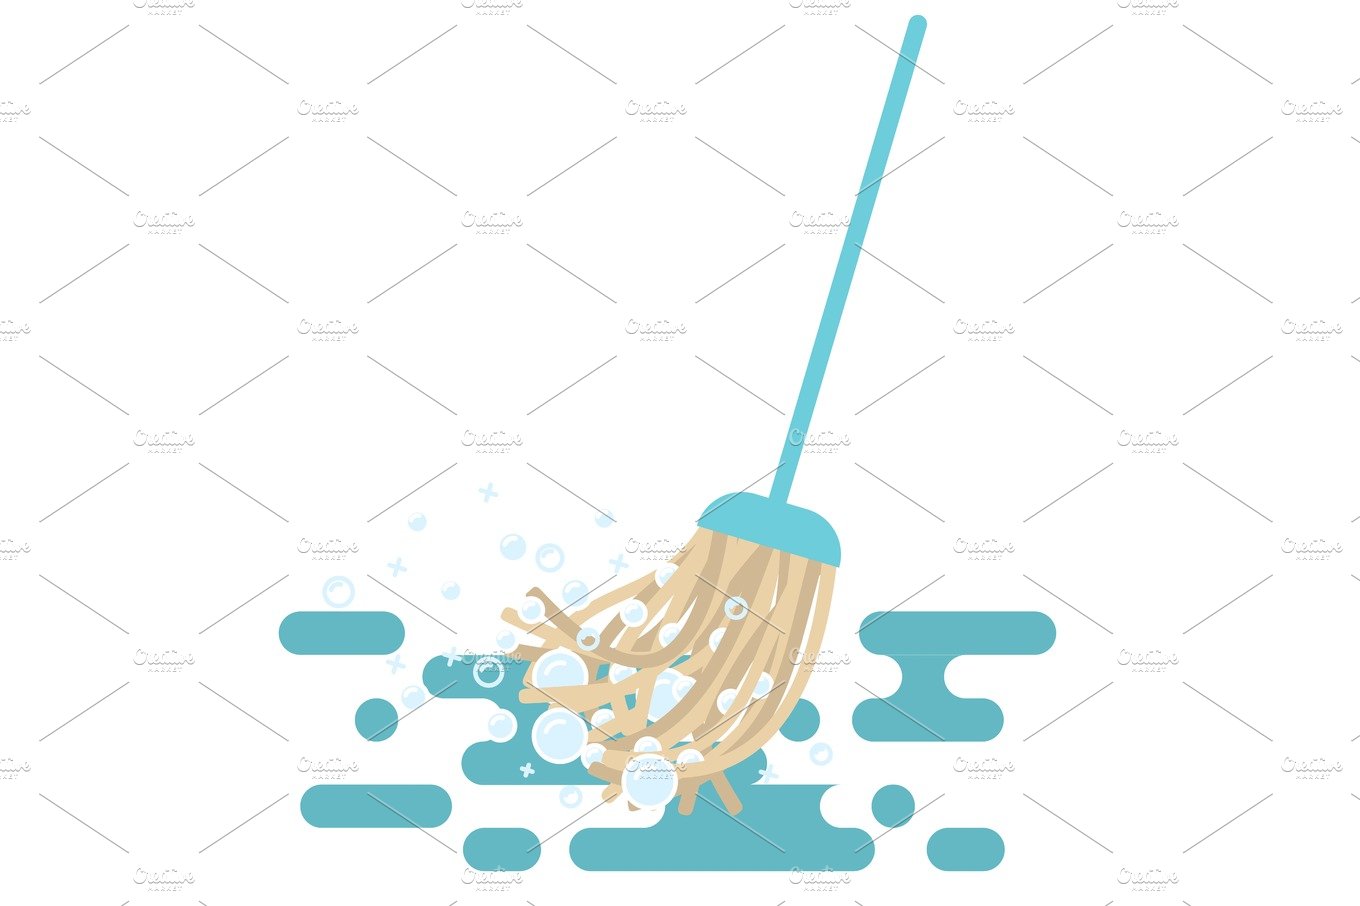 Mop vector illustration with foam bubbles. cover image.